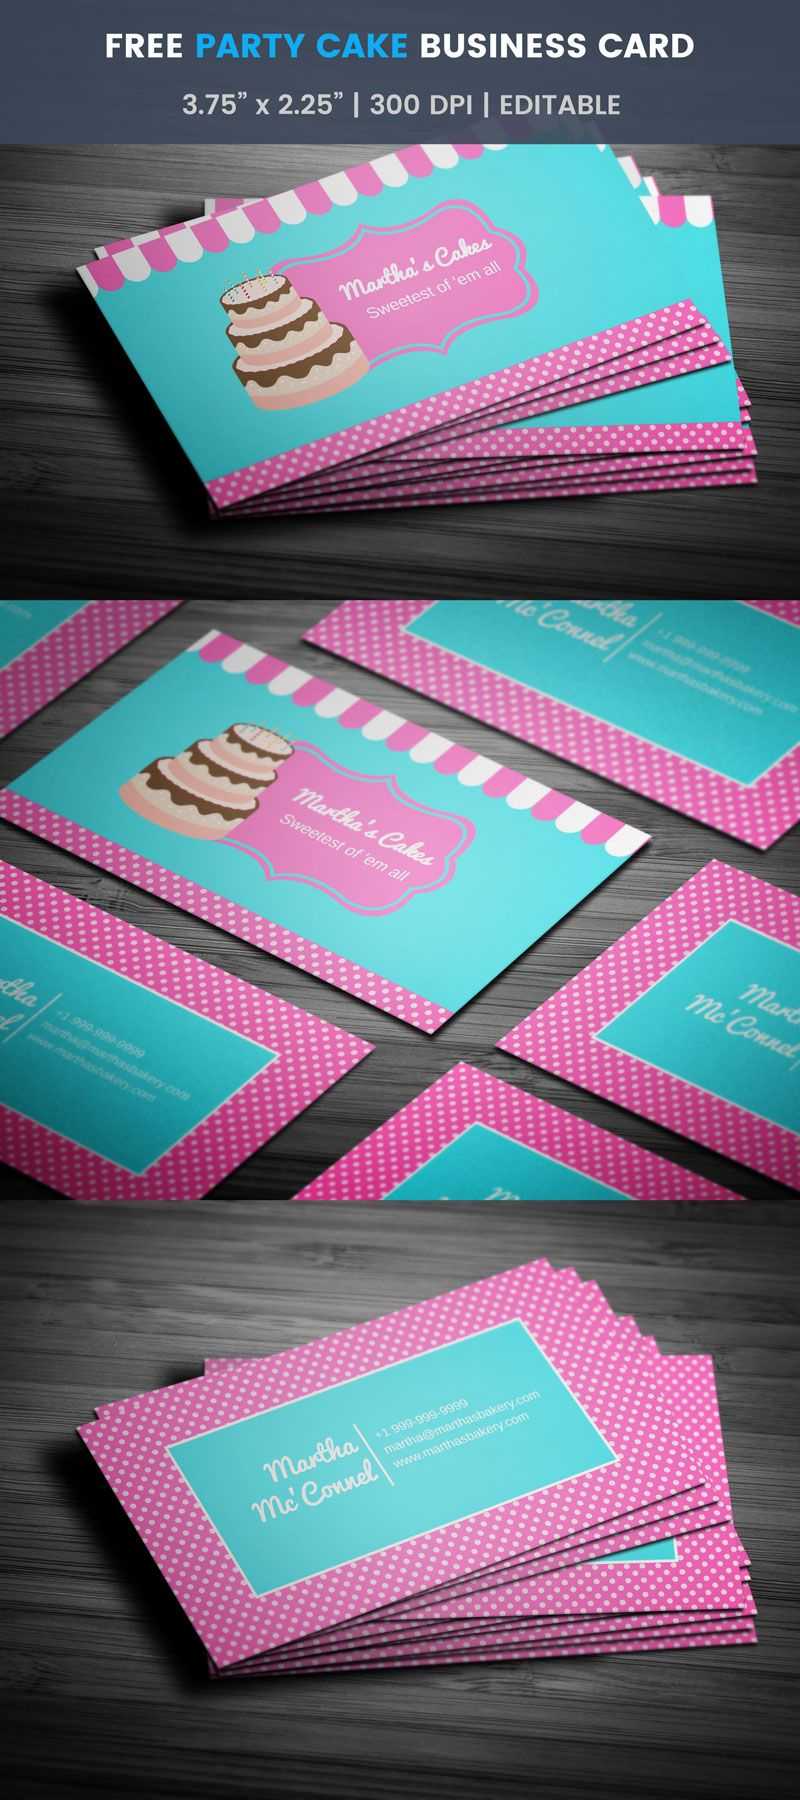 Party Cake Themed Bakery Business Card – Full Preview With Cake Business Cards Templates Free